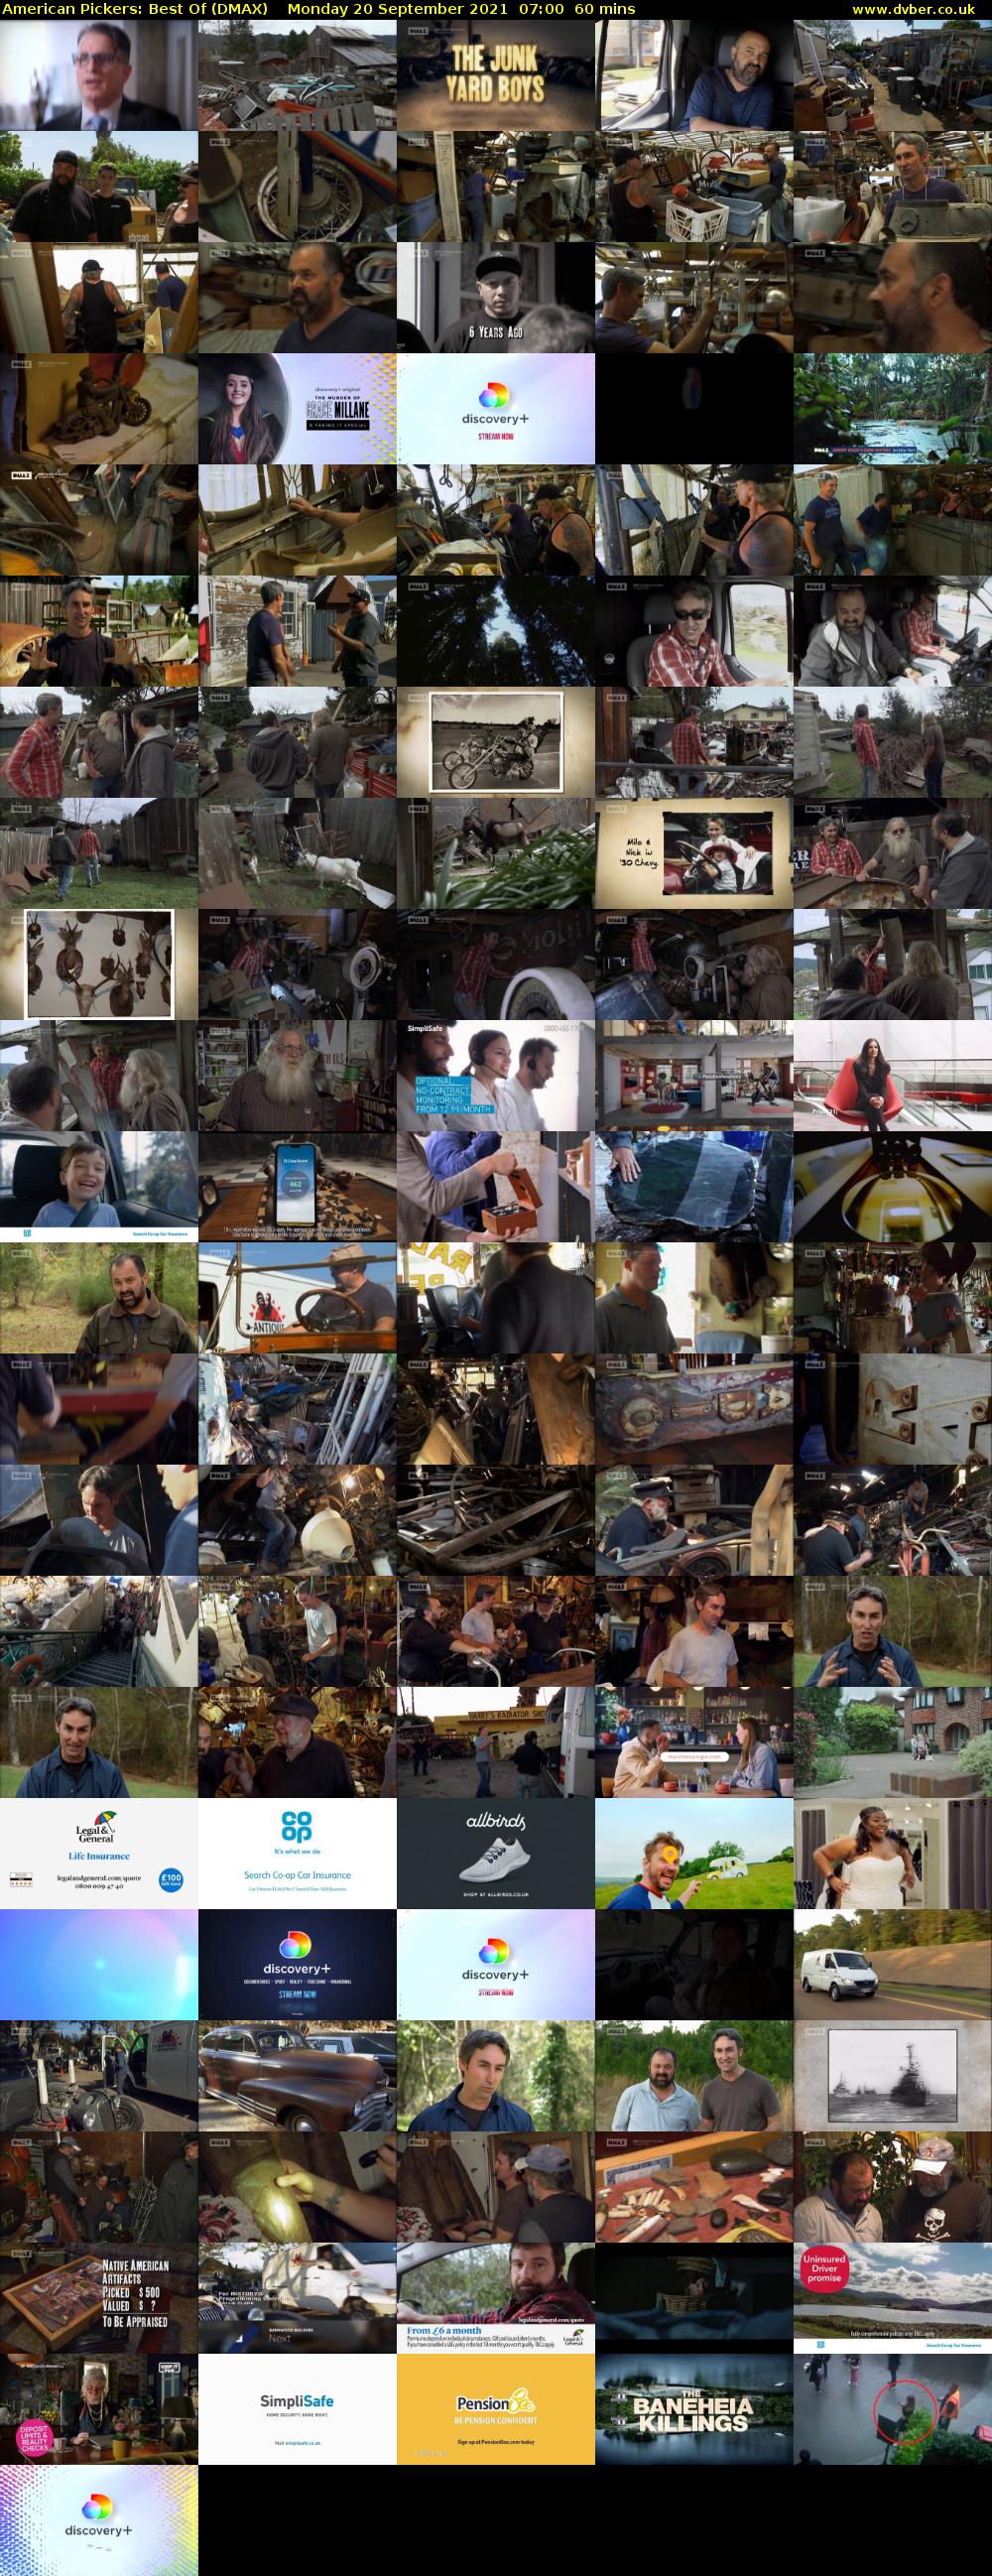 American Pickers: Best Of (DMAX) Monday 20 September 2021 07:00 - 08:00